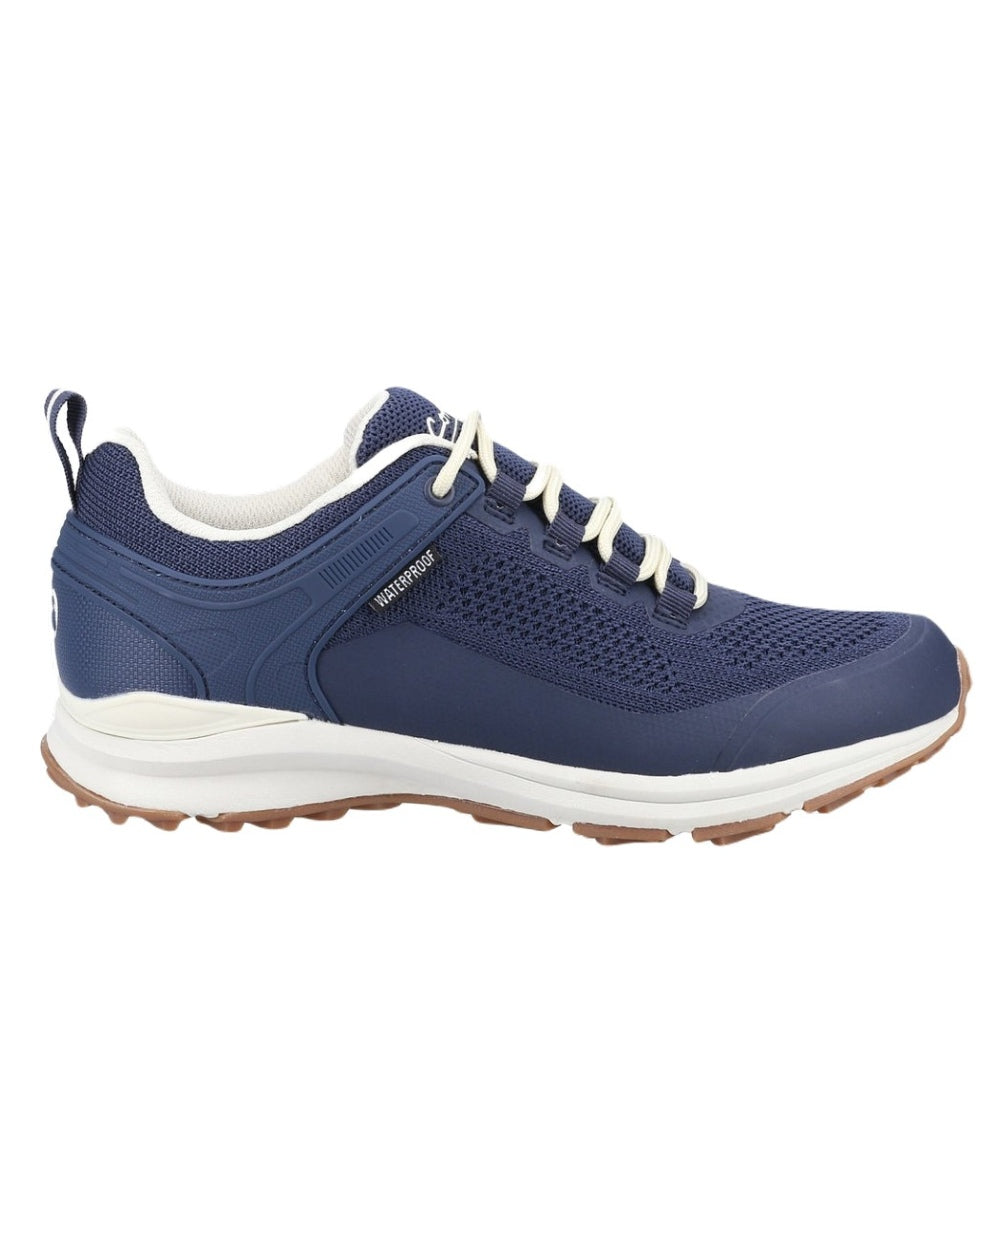 Navy coloured Cotswold Compton Womens Hiking Shoes on white background 